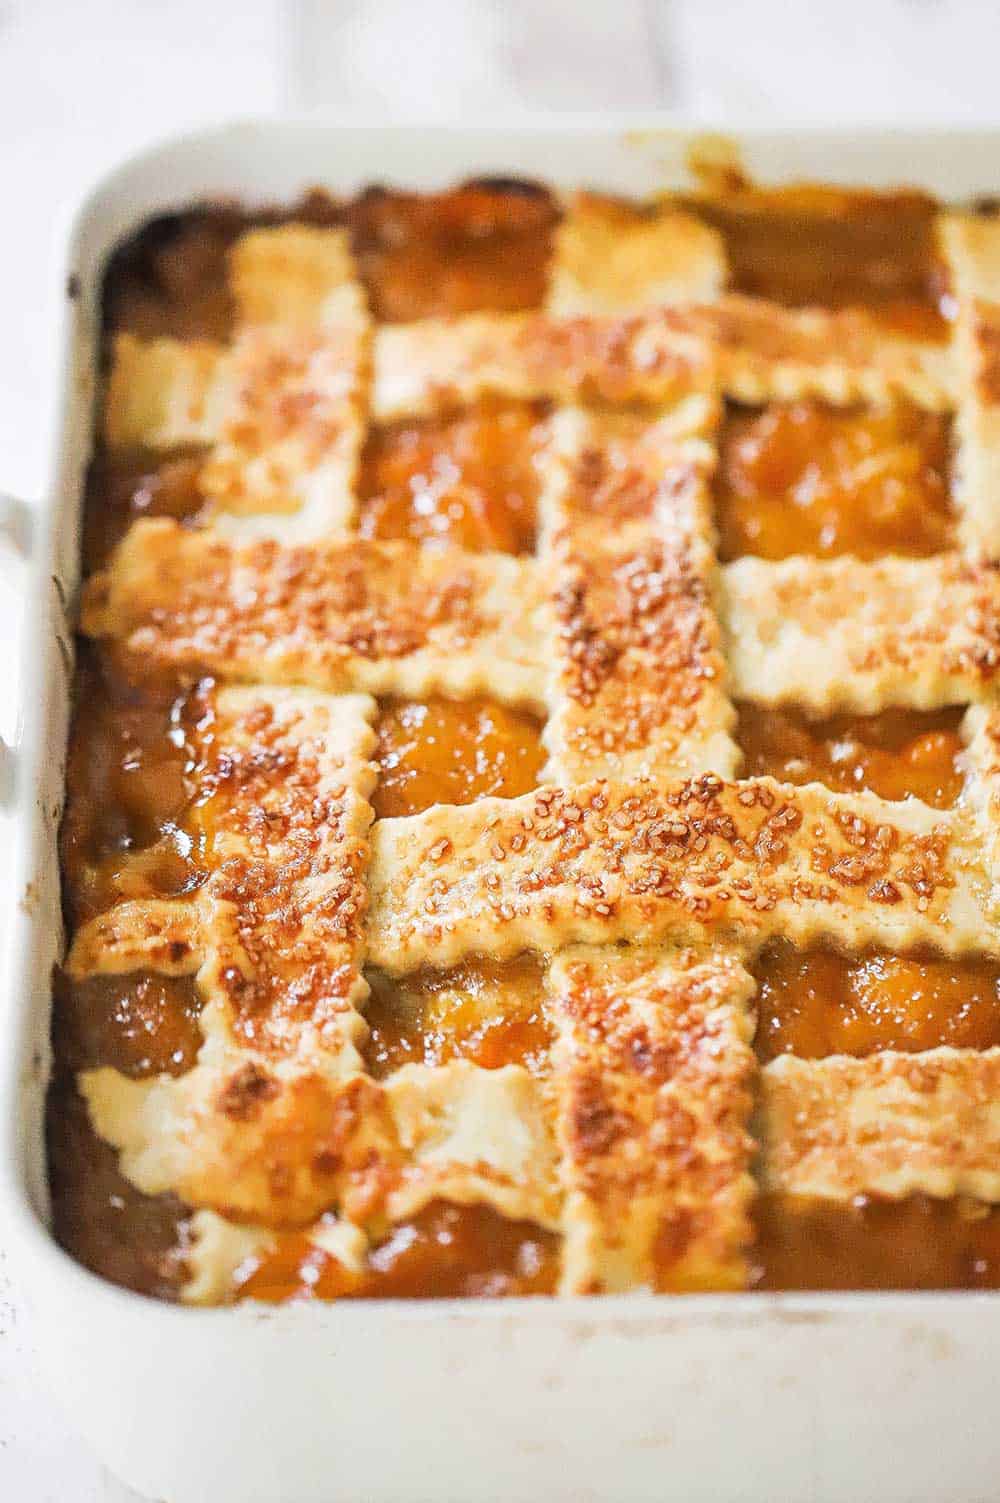 An overhead view of a baked peach cobbler that is topped with a lattice crust and topped with turbinado sugar.